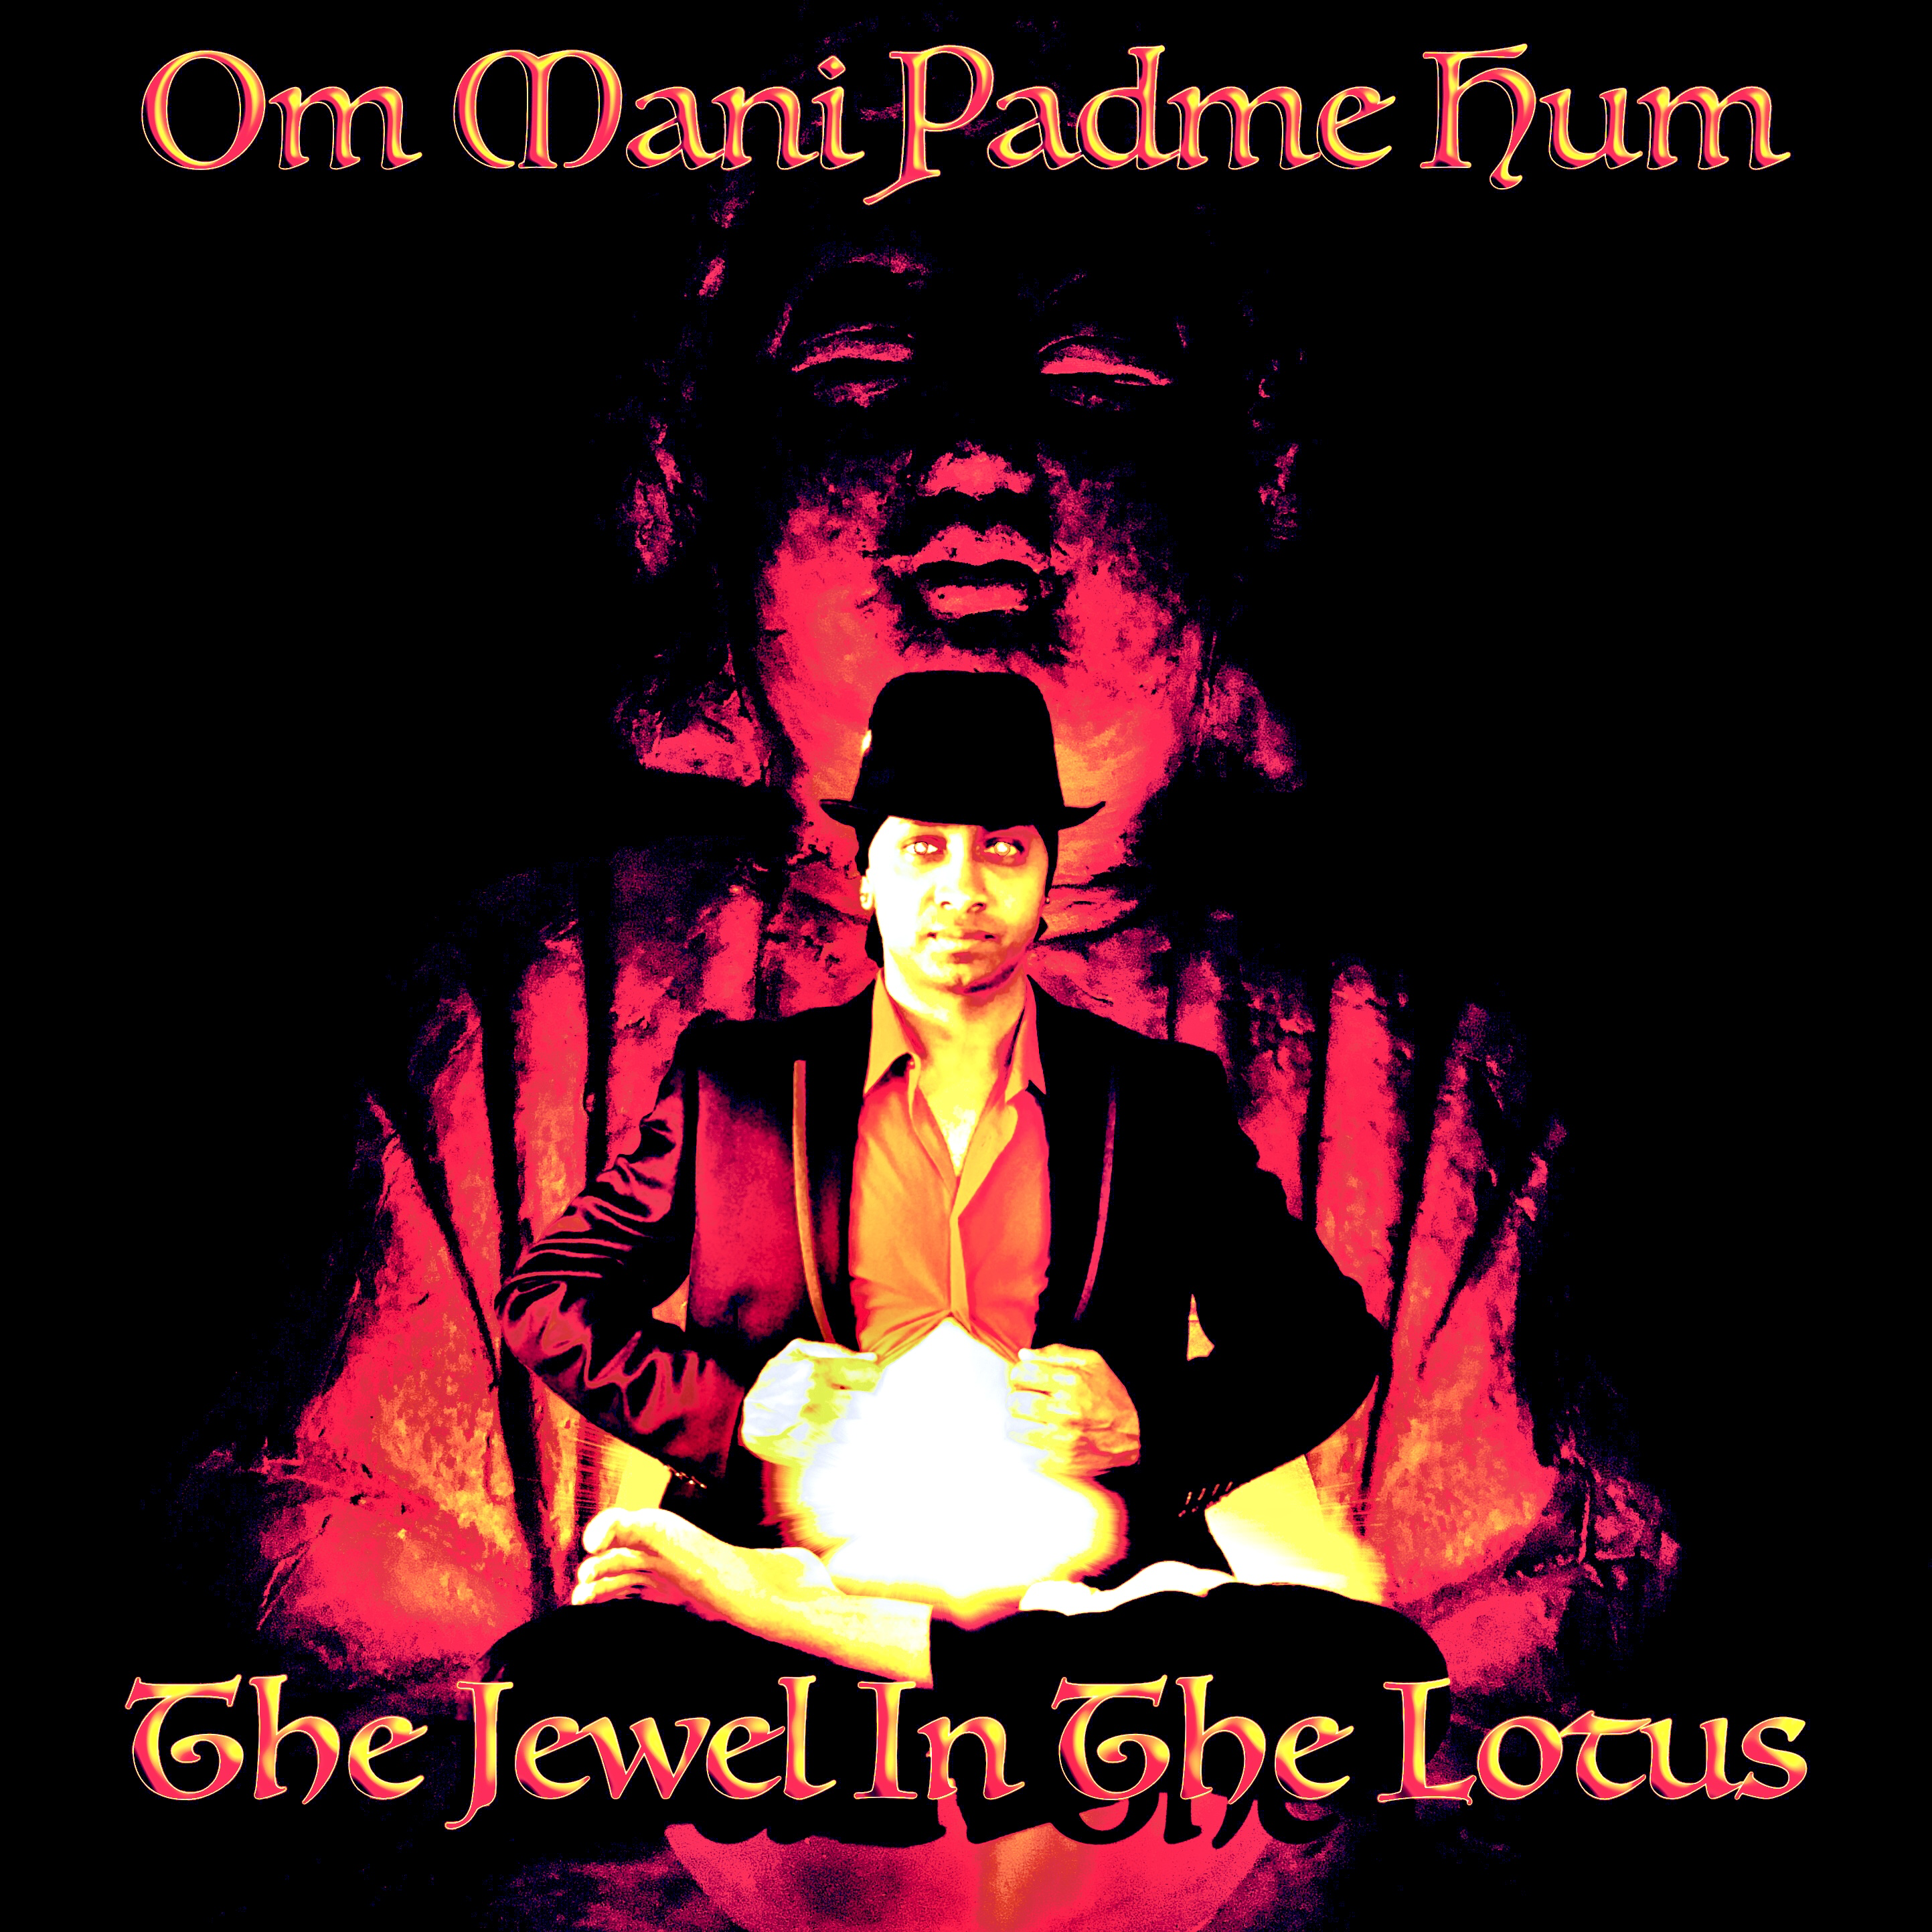 Art for The Jewel In The Lotus (Om Mani Padme Hum) by M.Class Dias